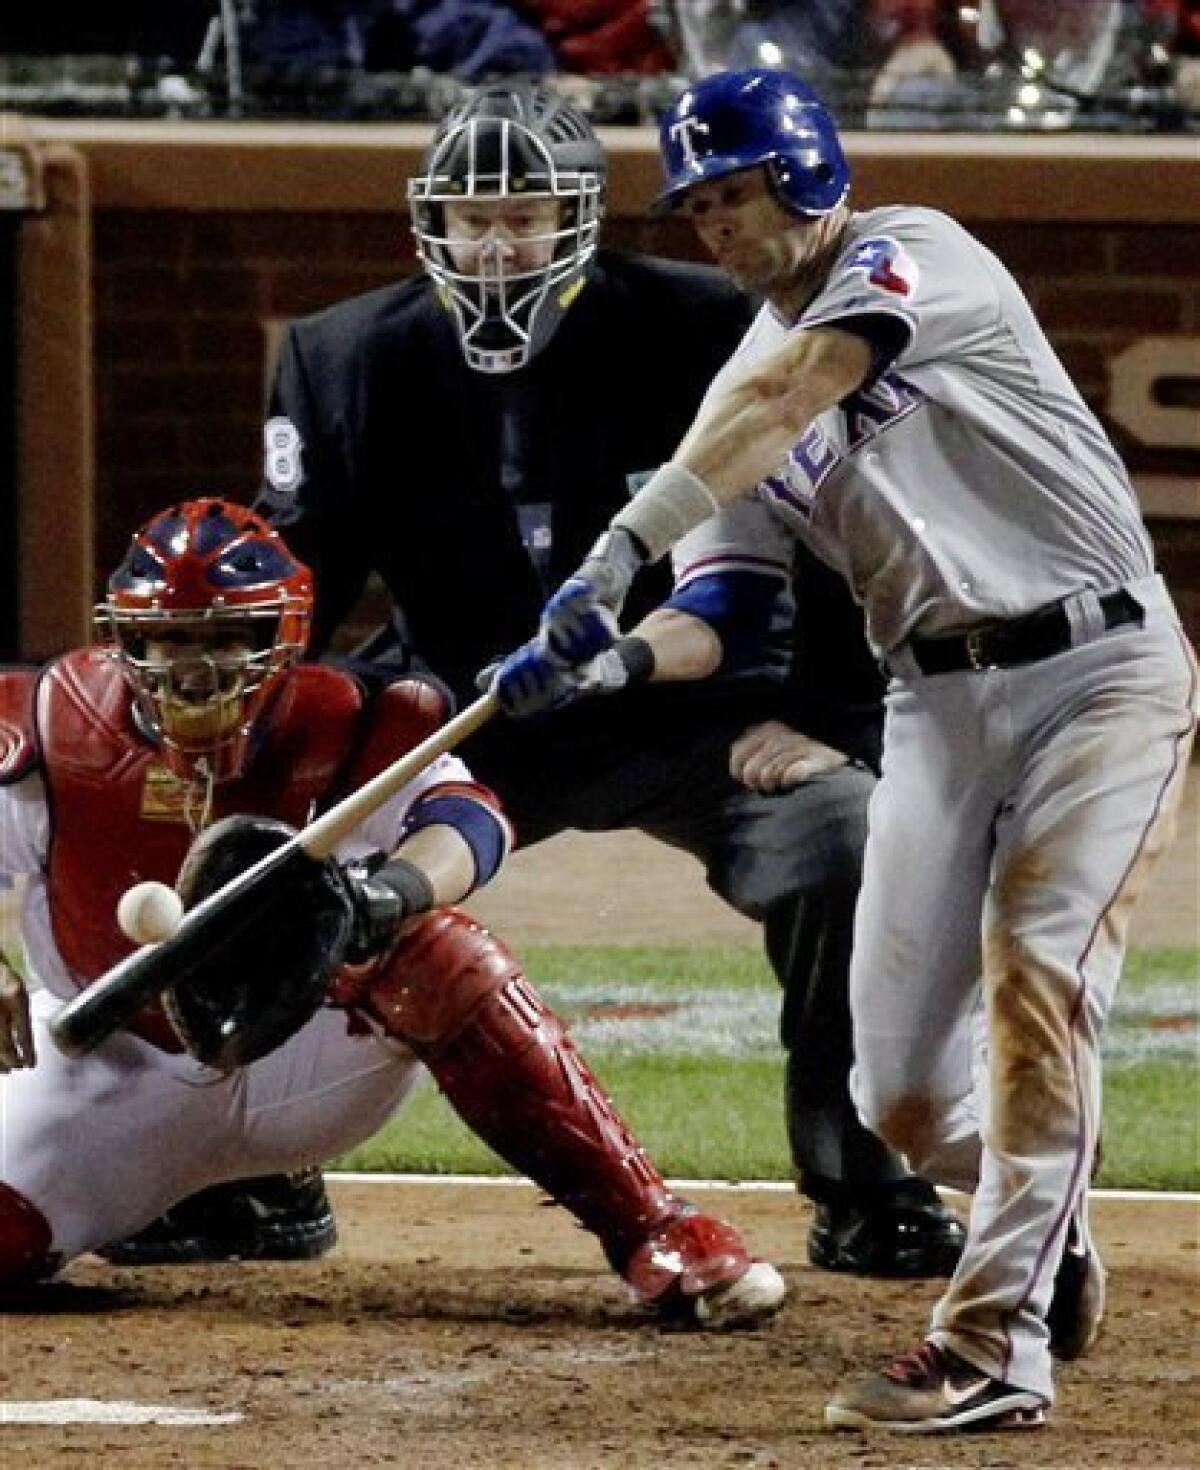 Game 6: HRs by Beltre, Cruz put Rangers up in 7th - The San Diego